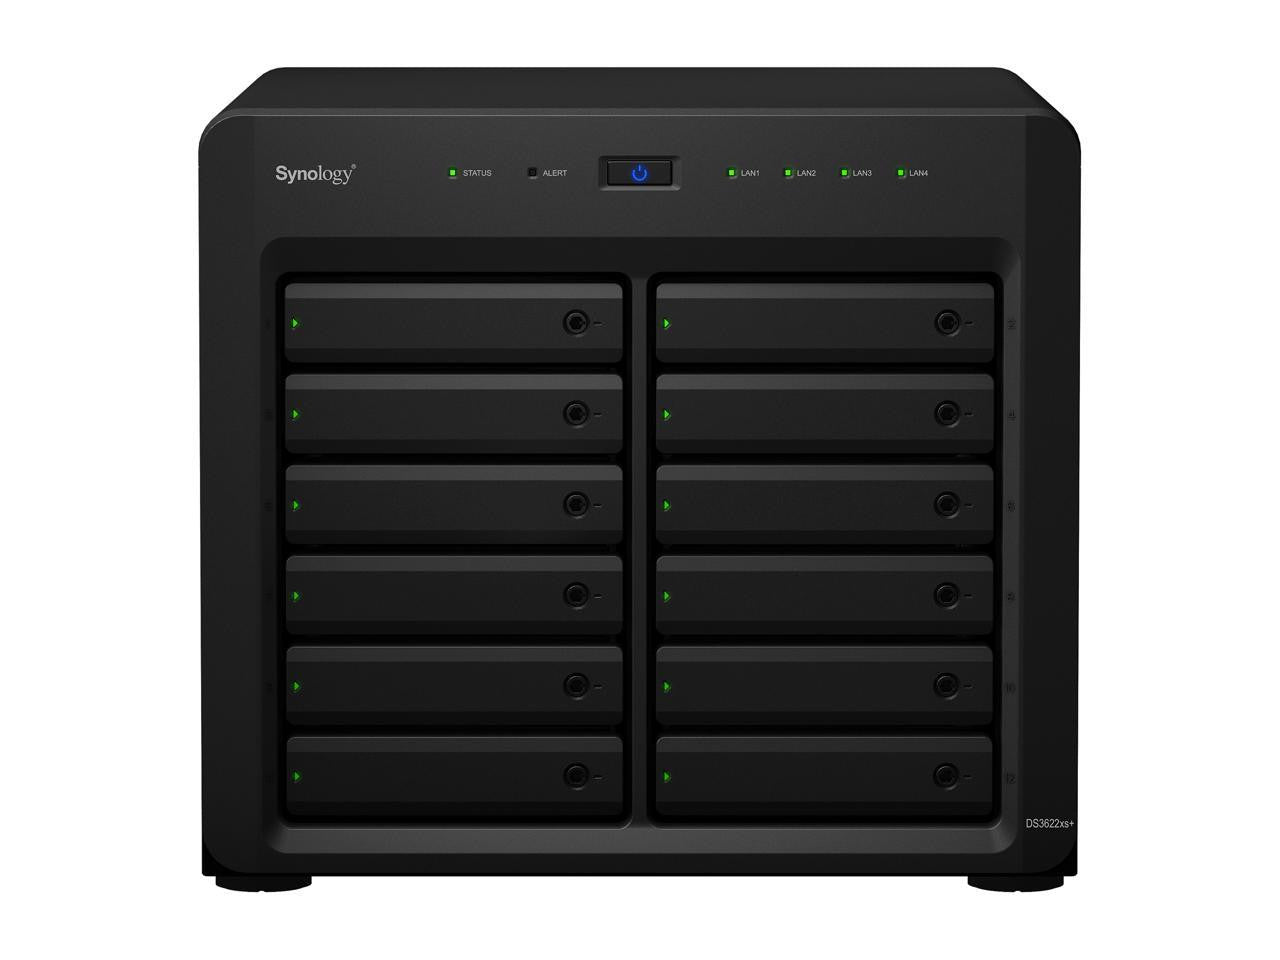 DS3622xs+ 12-BAY DiskStation with 48GB RAM and 144TB (12 x 12TB) of HAT5300 Synology Enterprise Drives